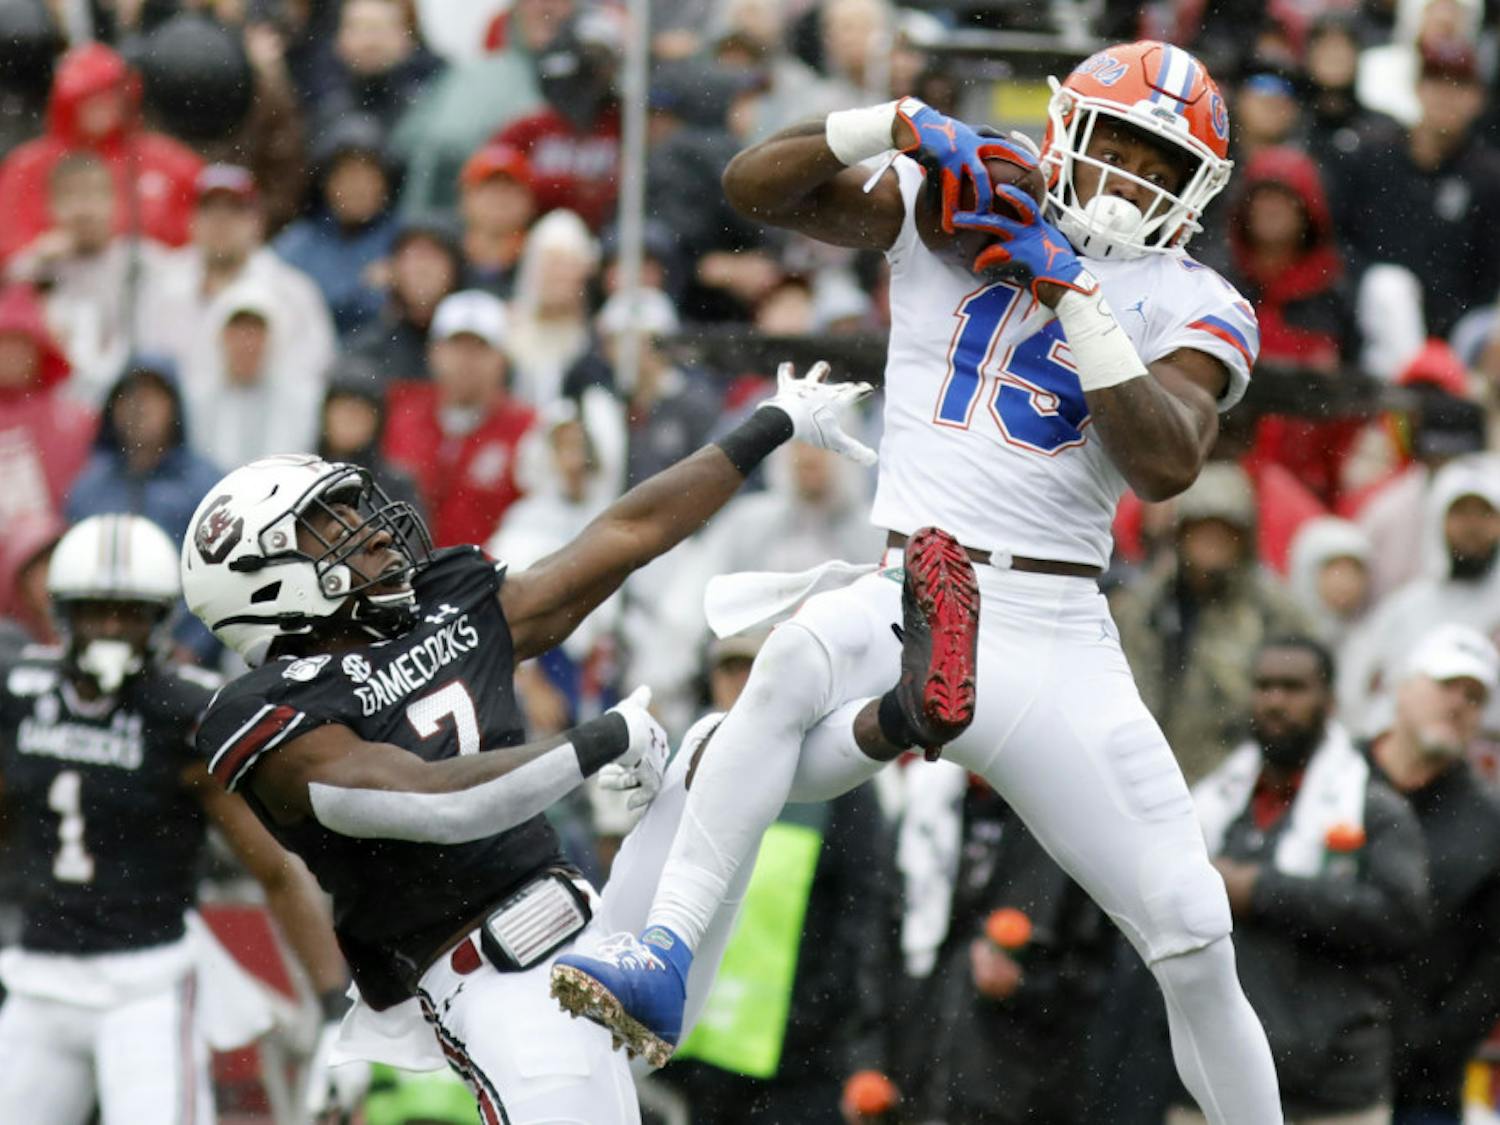 Florida's Jacob Copeland (15) catches a pass for a touchdown as South Carolina's Jammie Robinson (7) defends in the first half of an NCAA college football game Saturday, Oct. 19, 2019, in Columbia, SC.